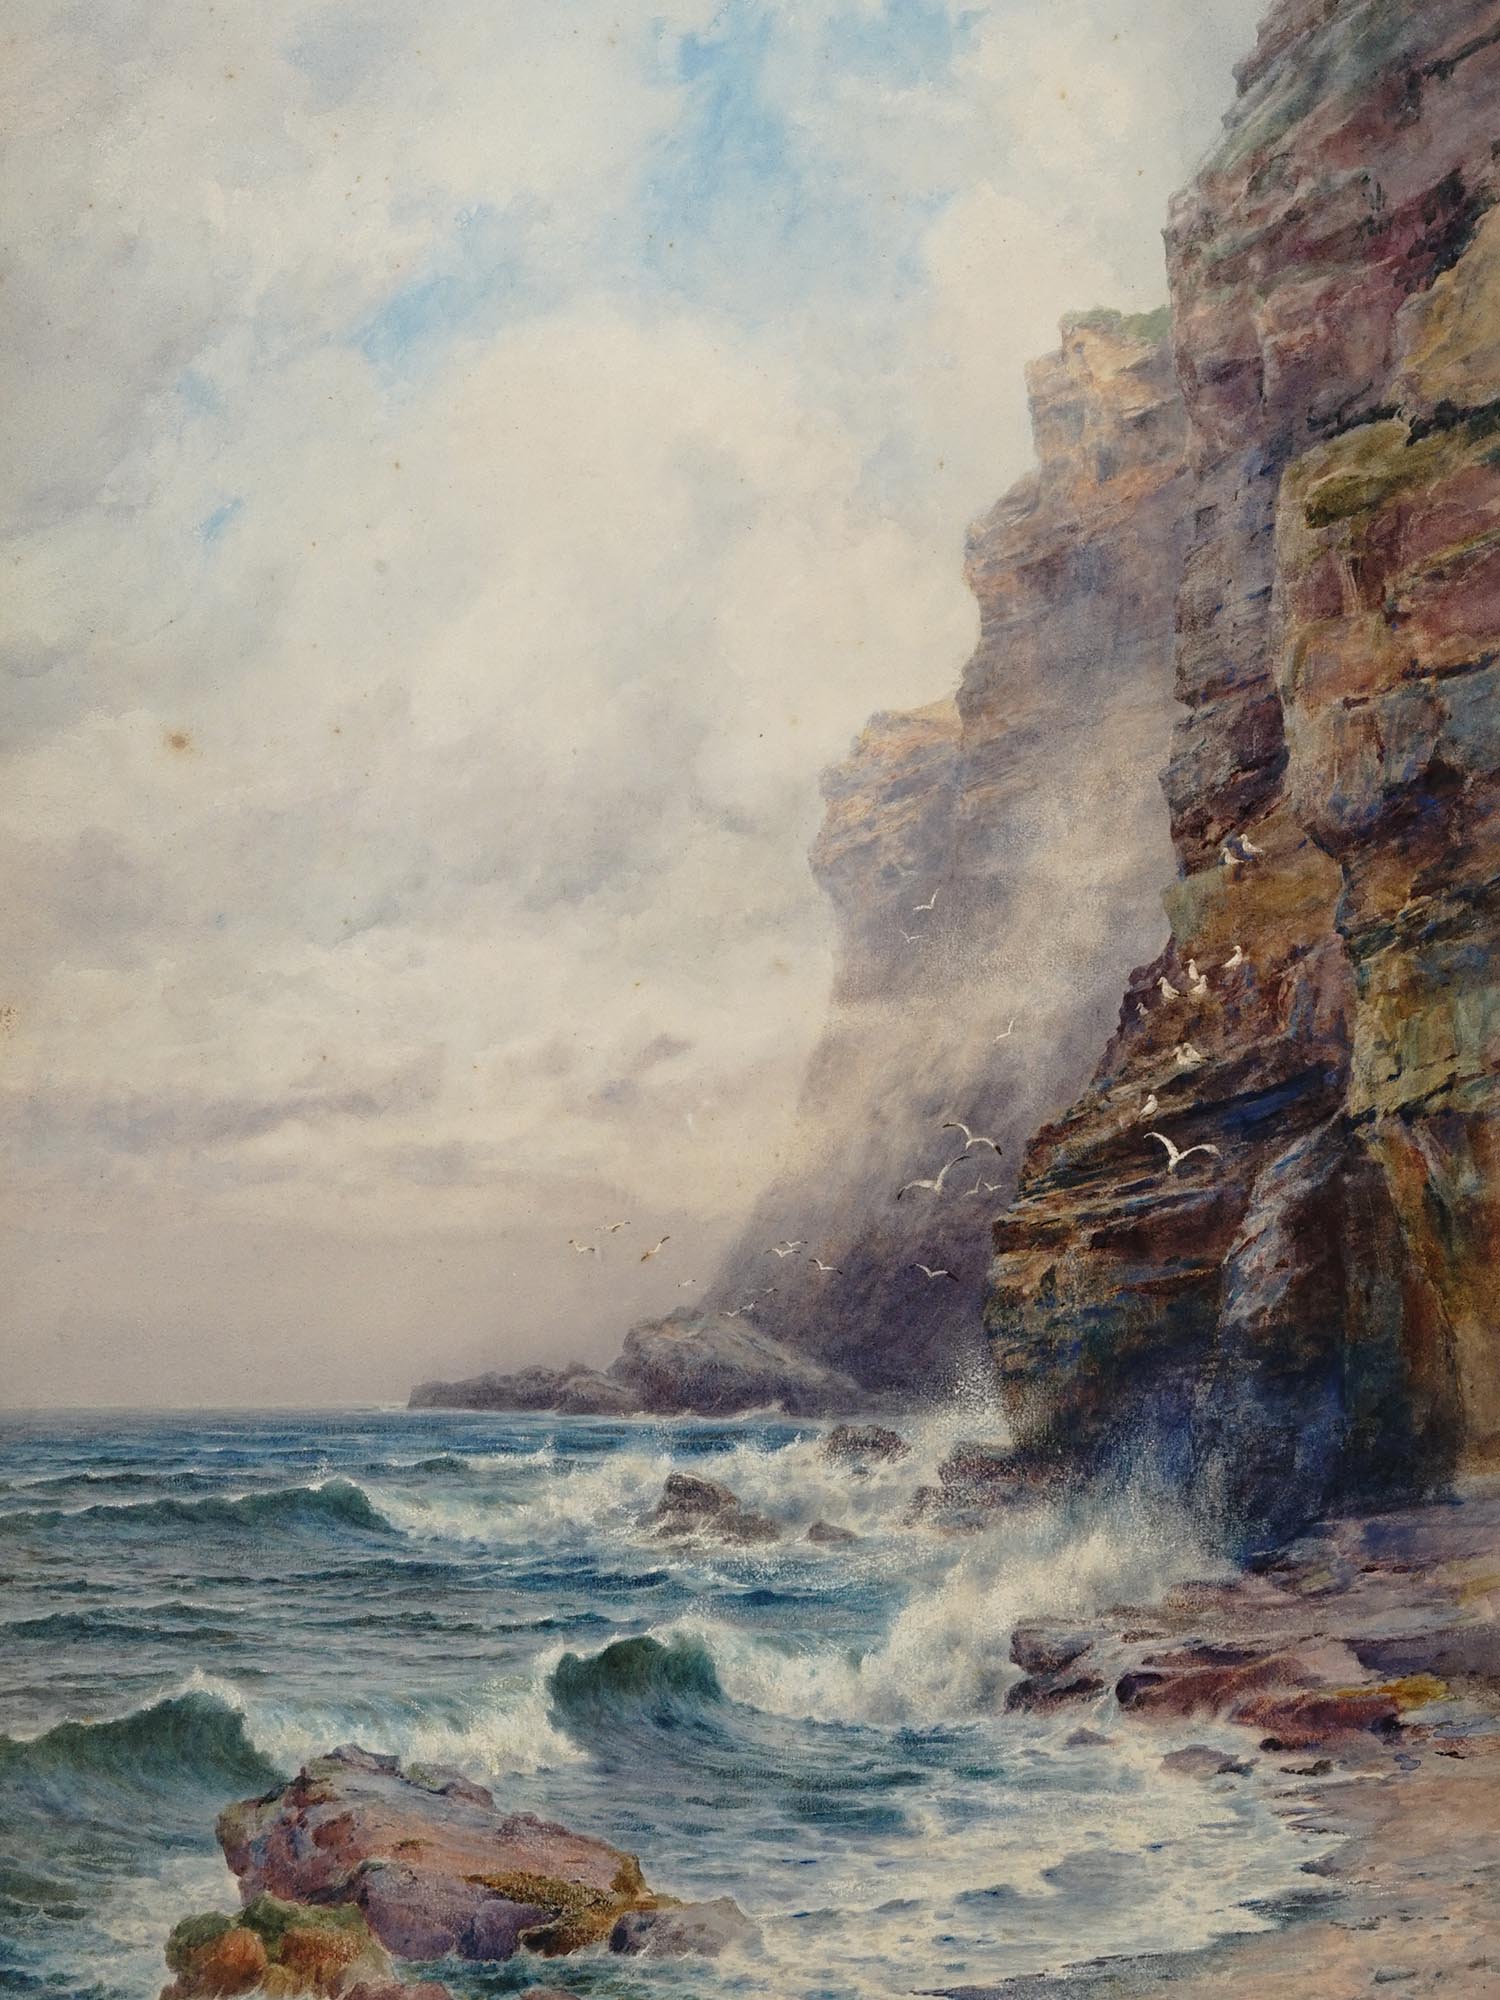 SEASCAPE WATERCOLOR PAINTING BY WILLIAM RICHARDS PIC-1